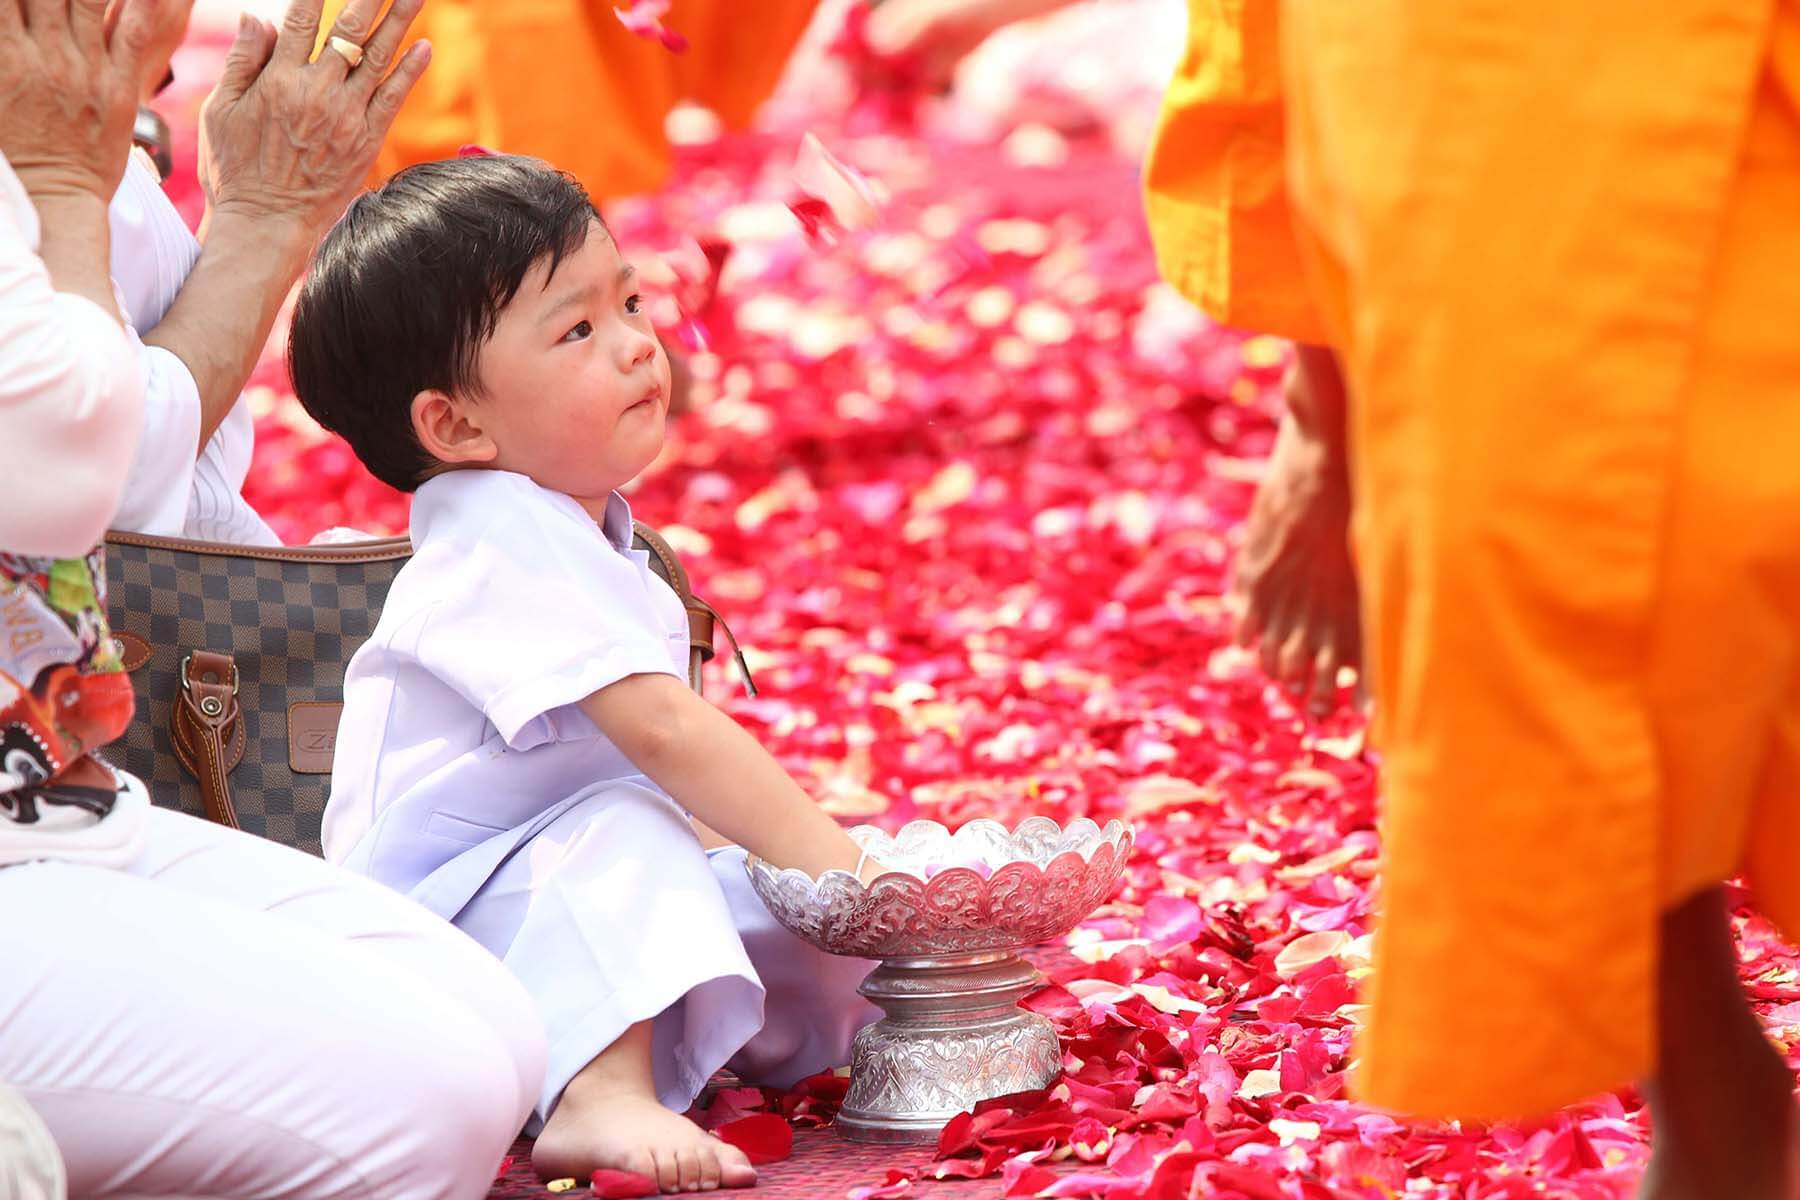 Toddler surrounded by flowers at Buddhist festival.